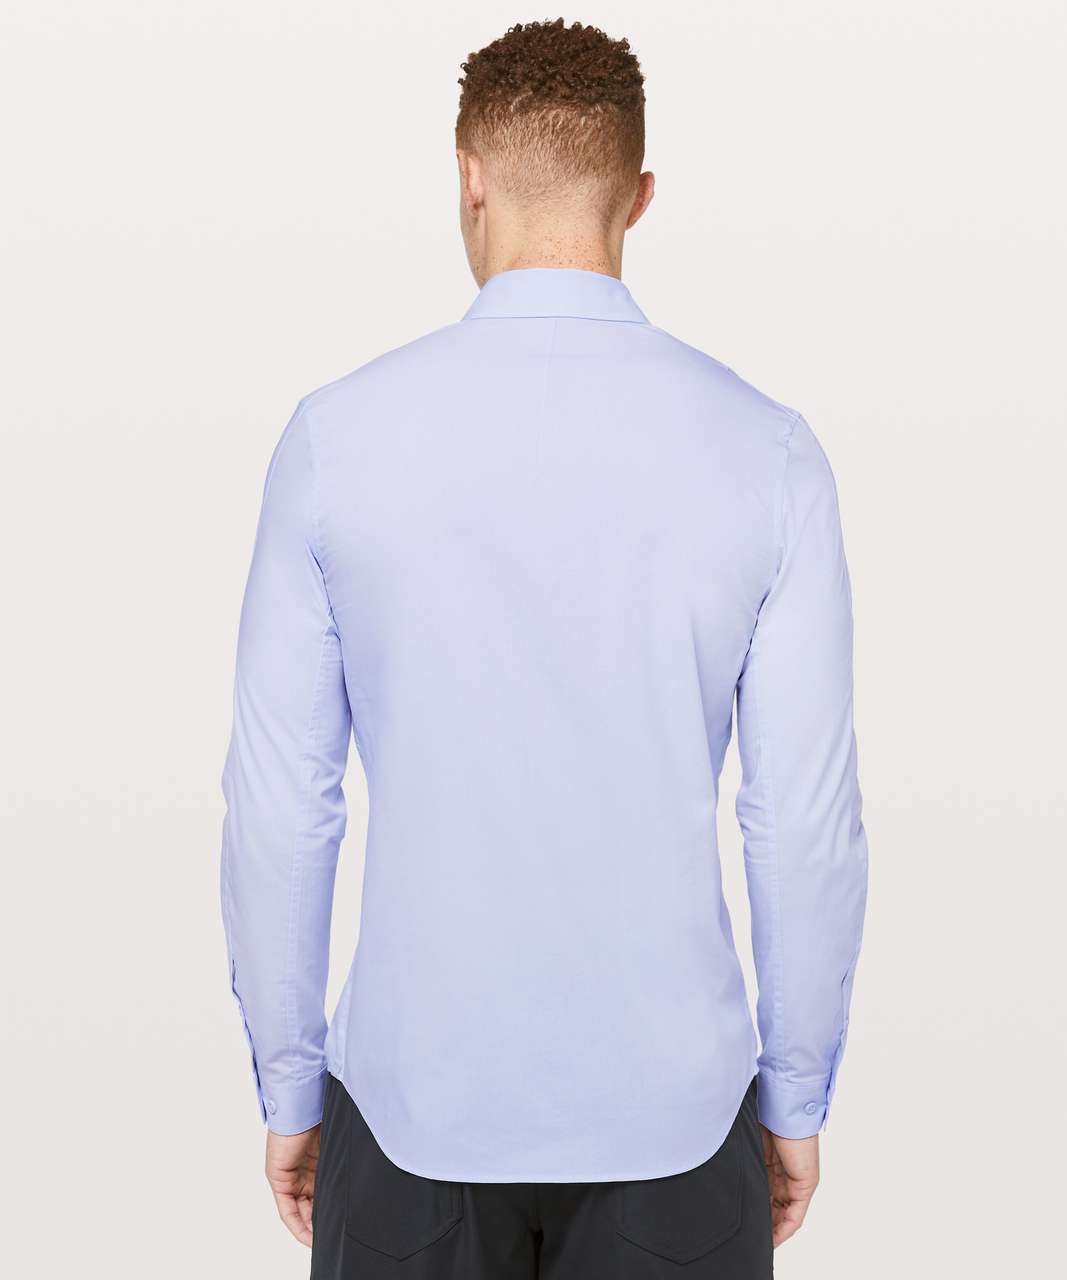 Lululemon Down To The Wire Shirt - Serene Blue